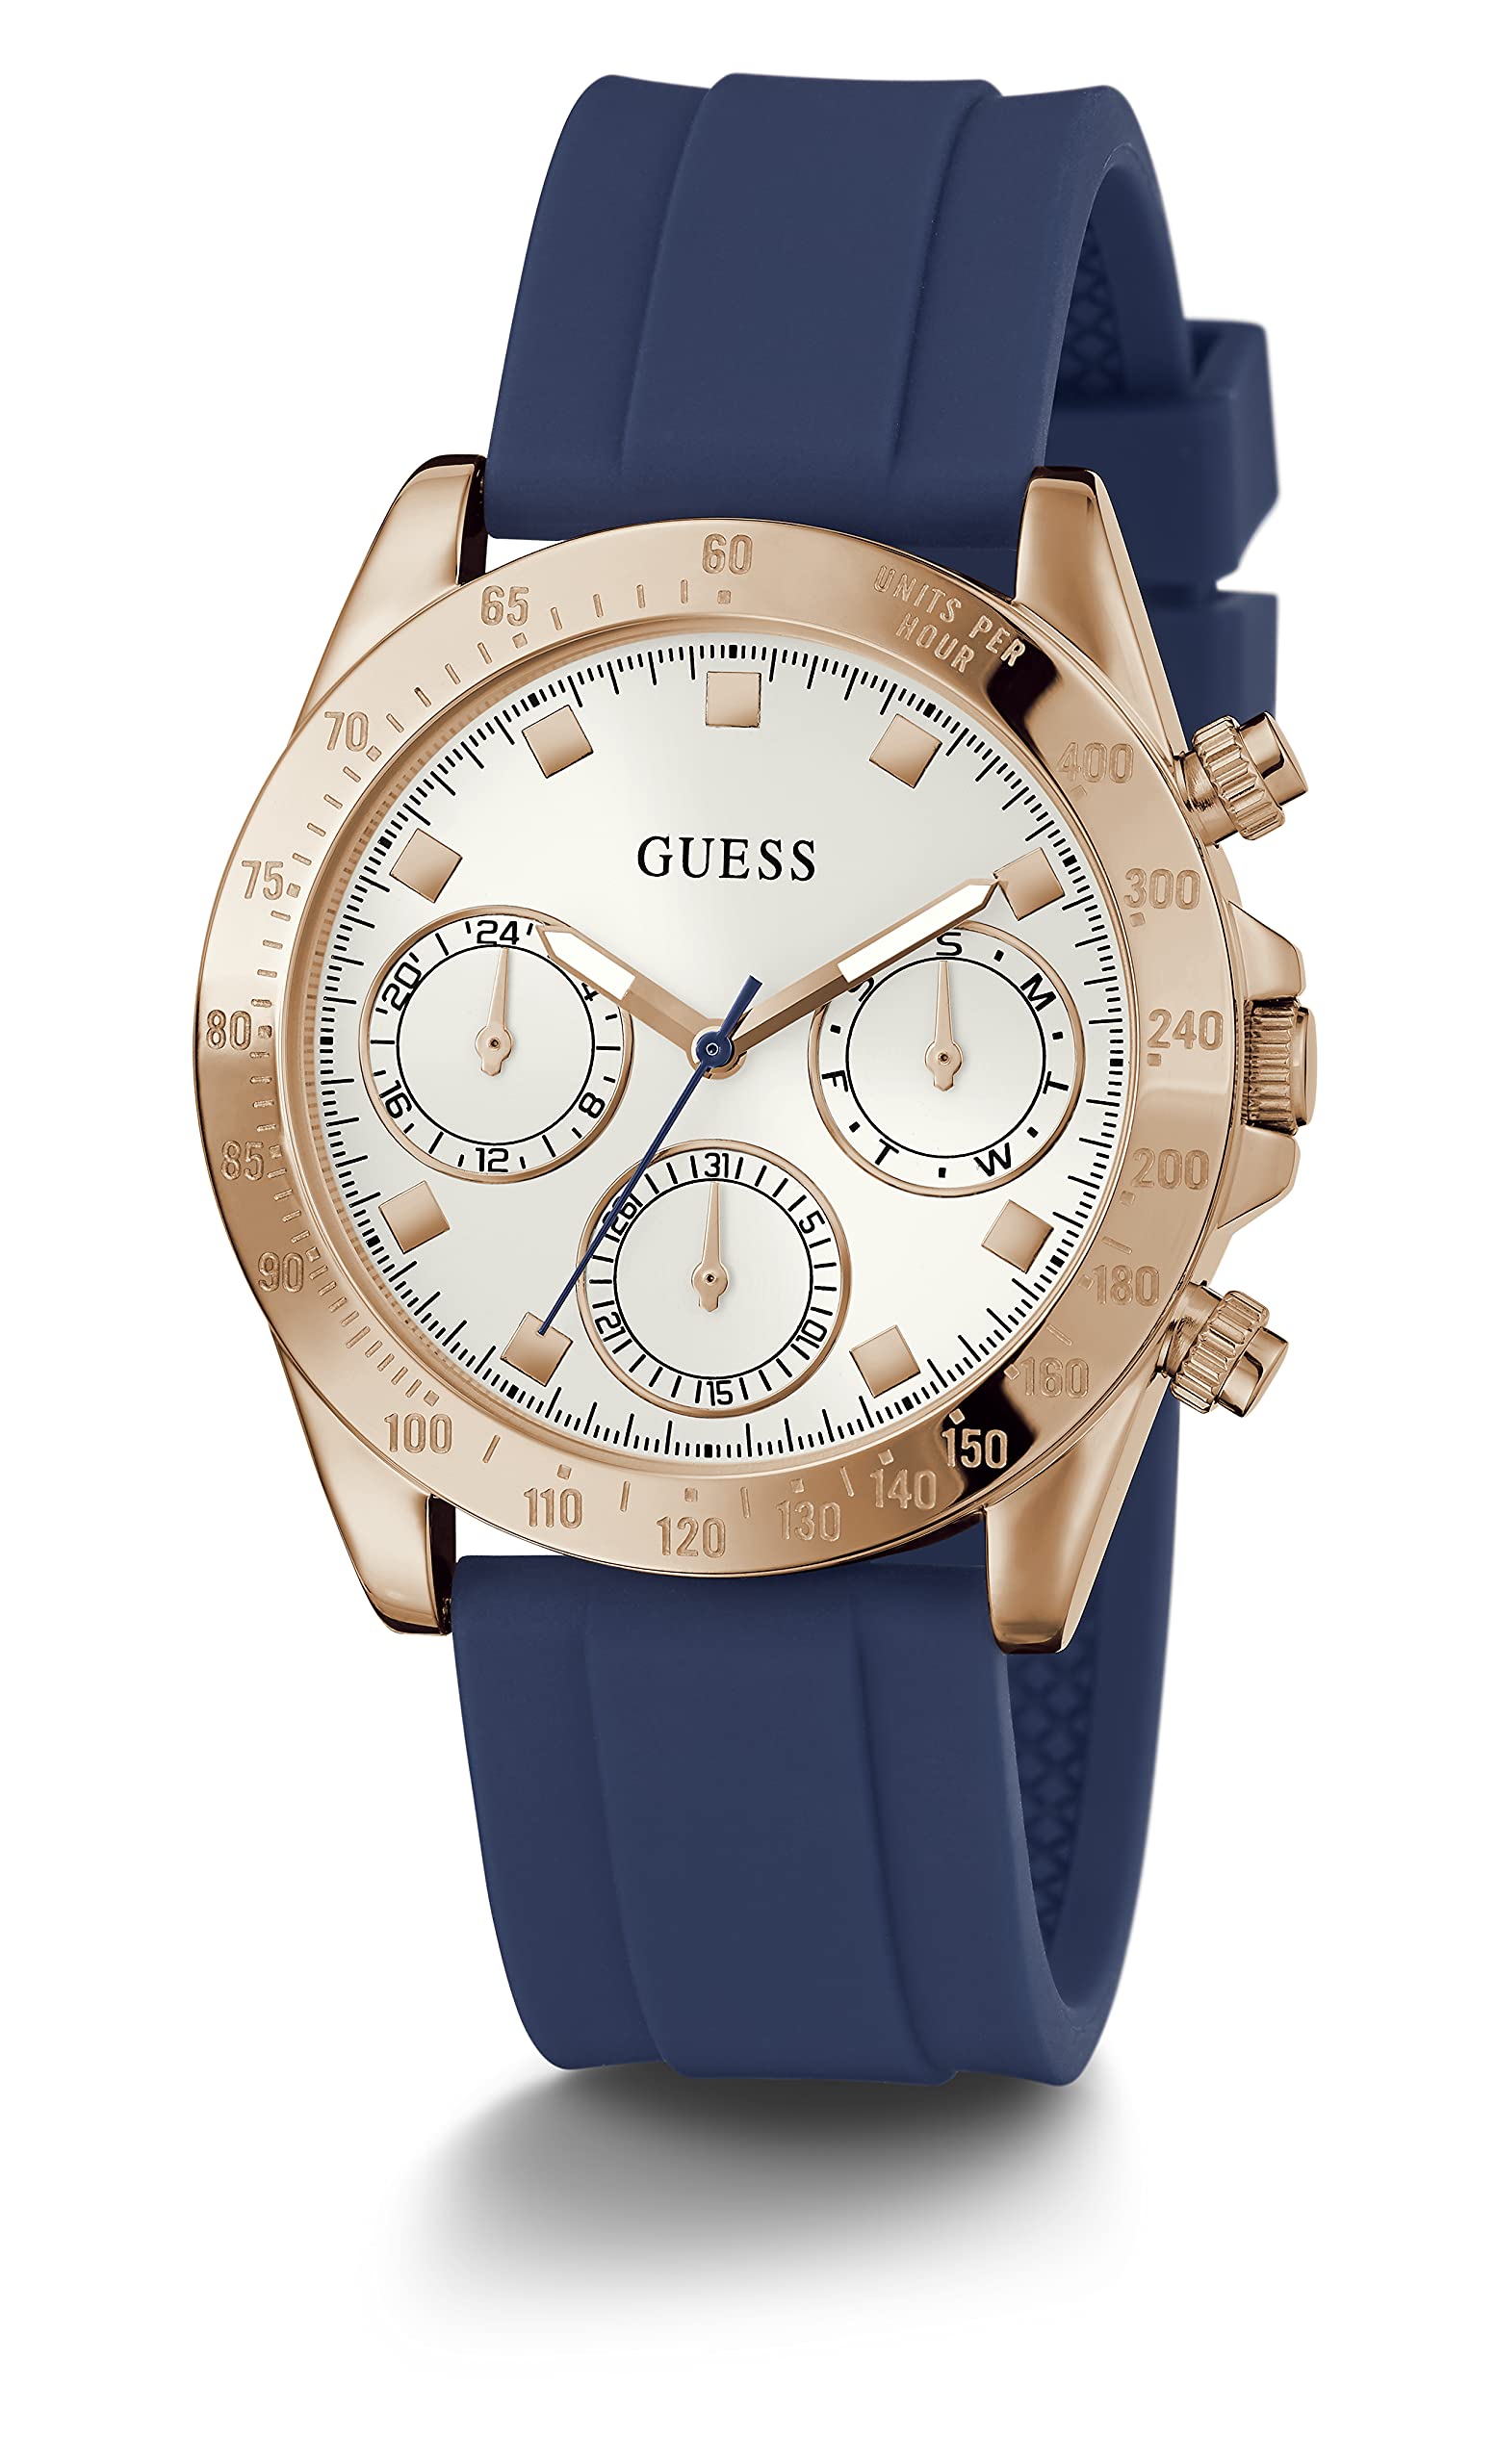 GUESS Women's Stainless Steel Quartz Watch with Silicone Strap